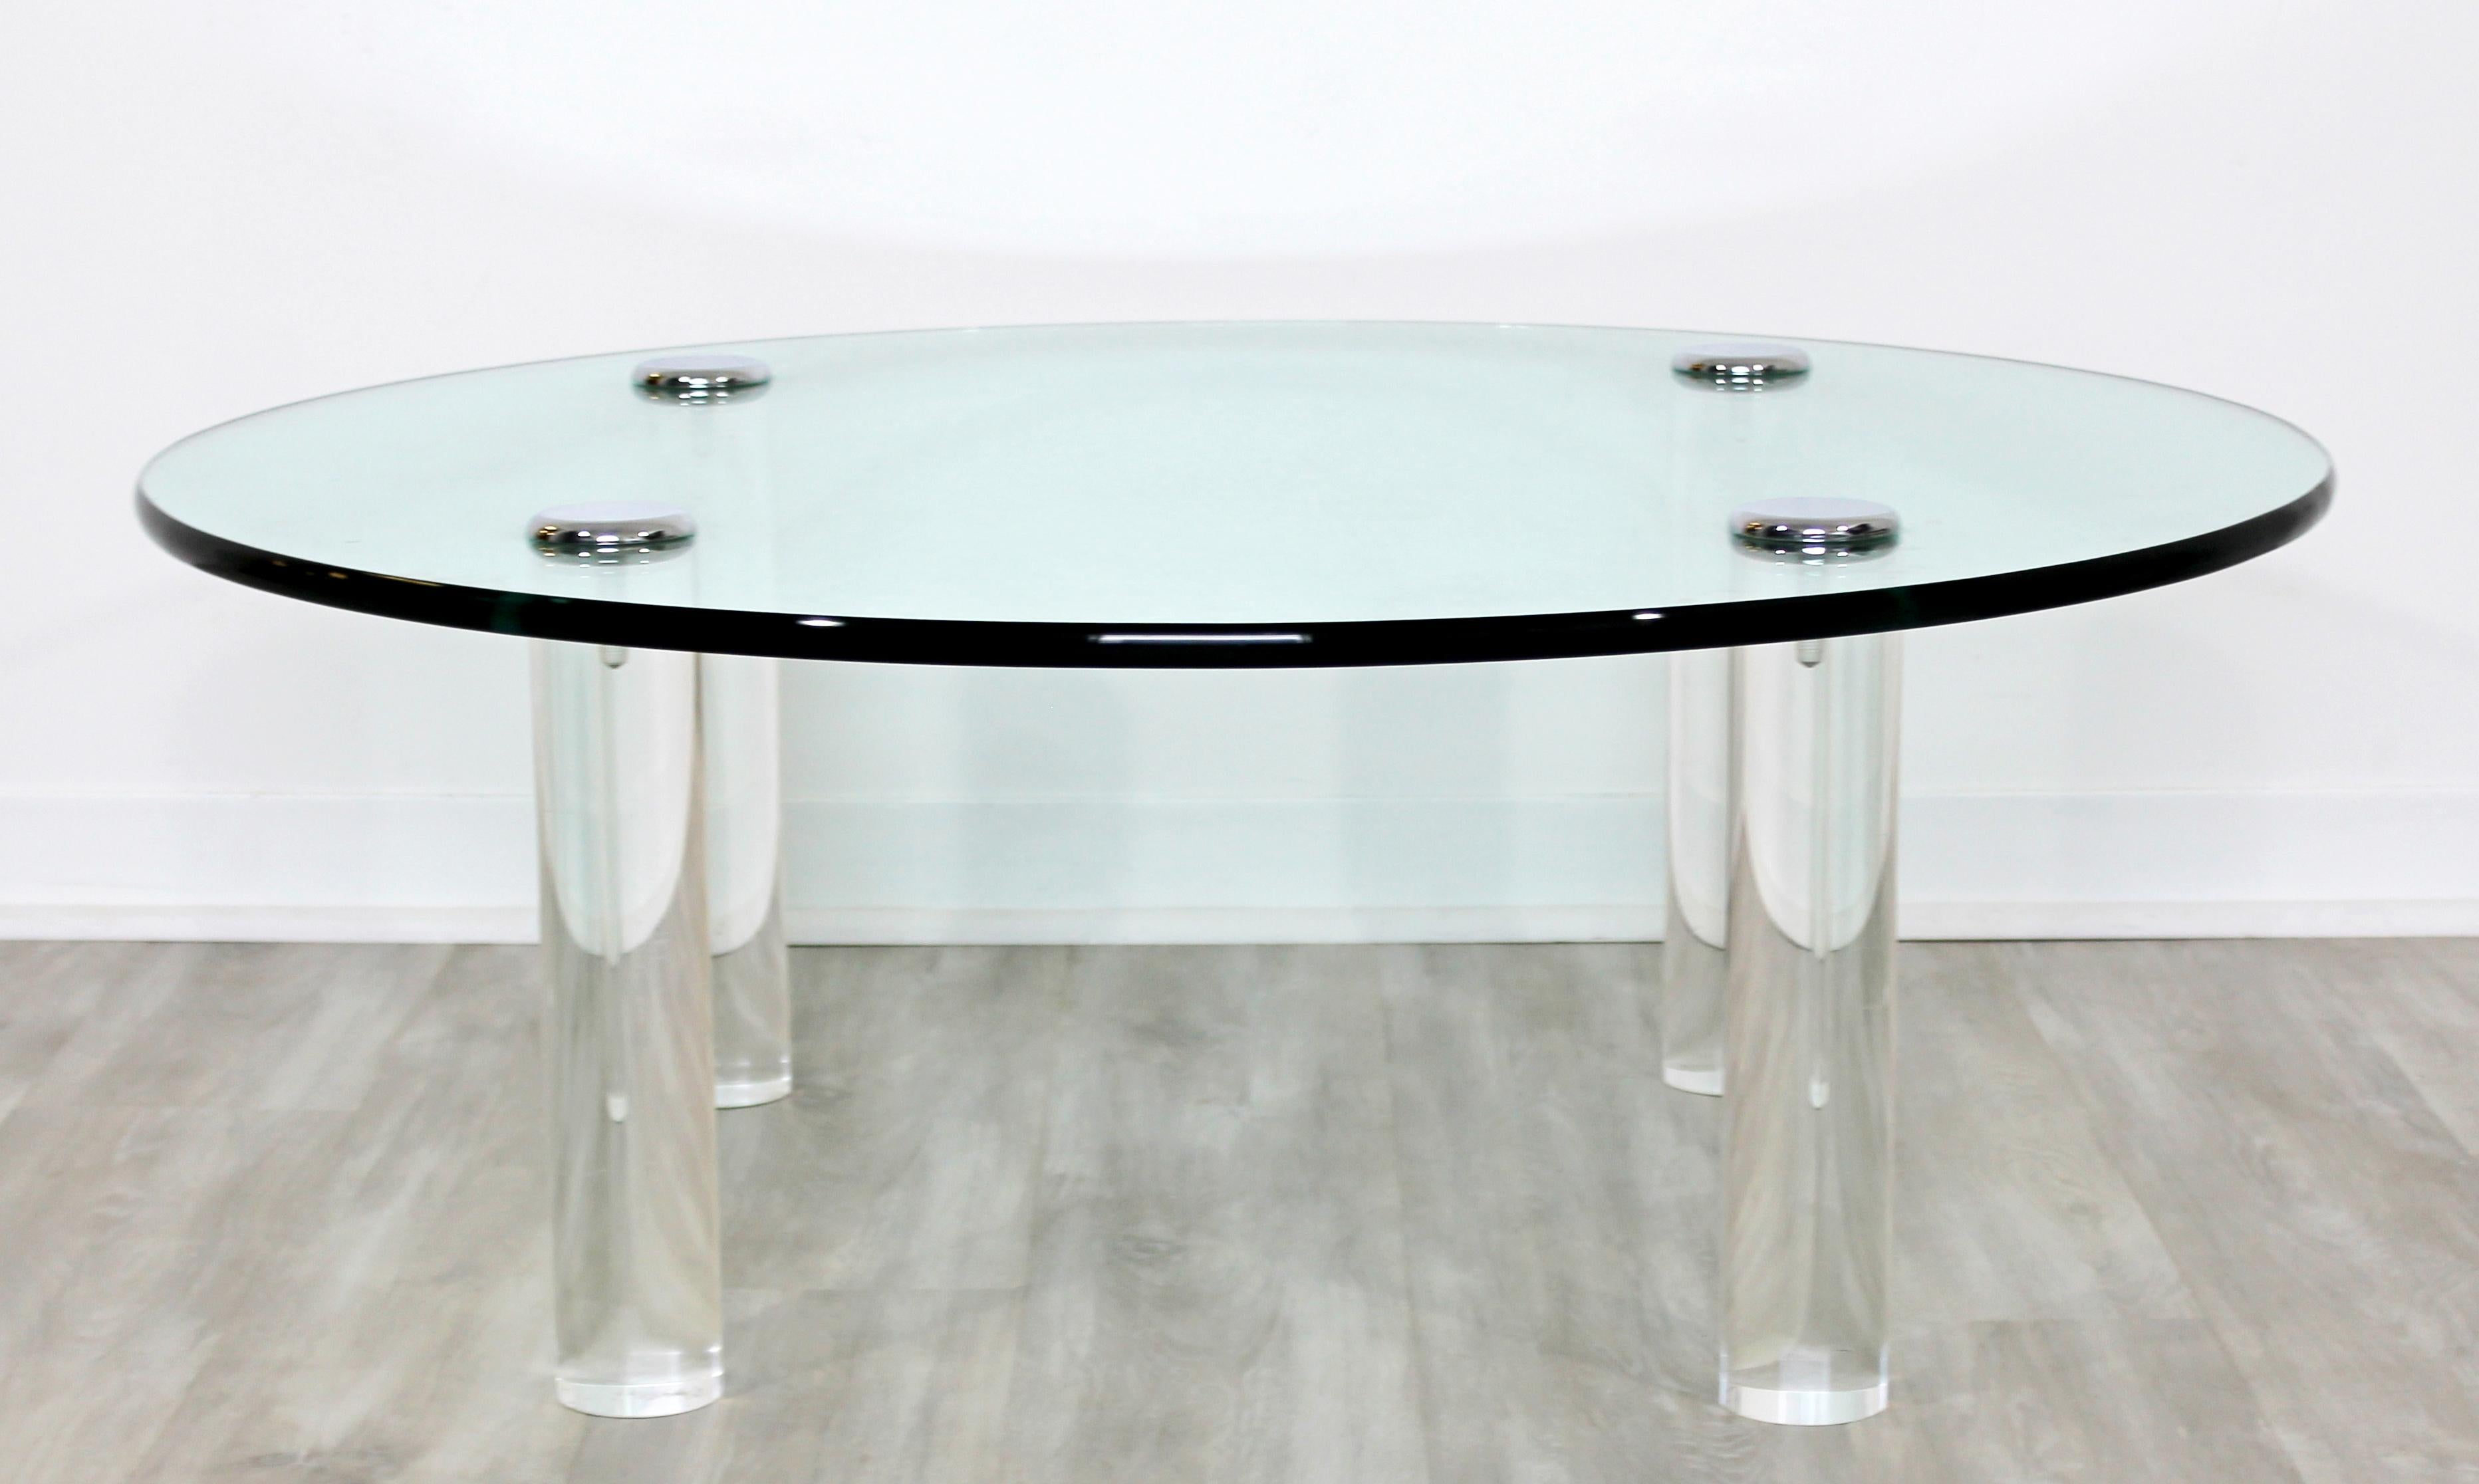 For your consideration is a stunning, round coffee table, made of glass and lucite and with chrome caps, by Pace, circa the 1970s. In excellent condition. The dimensions are 42